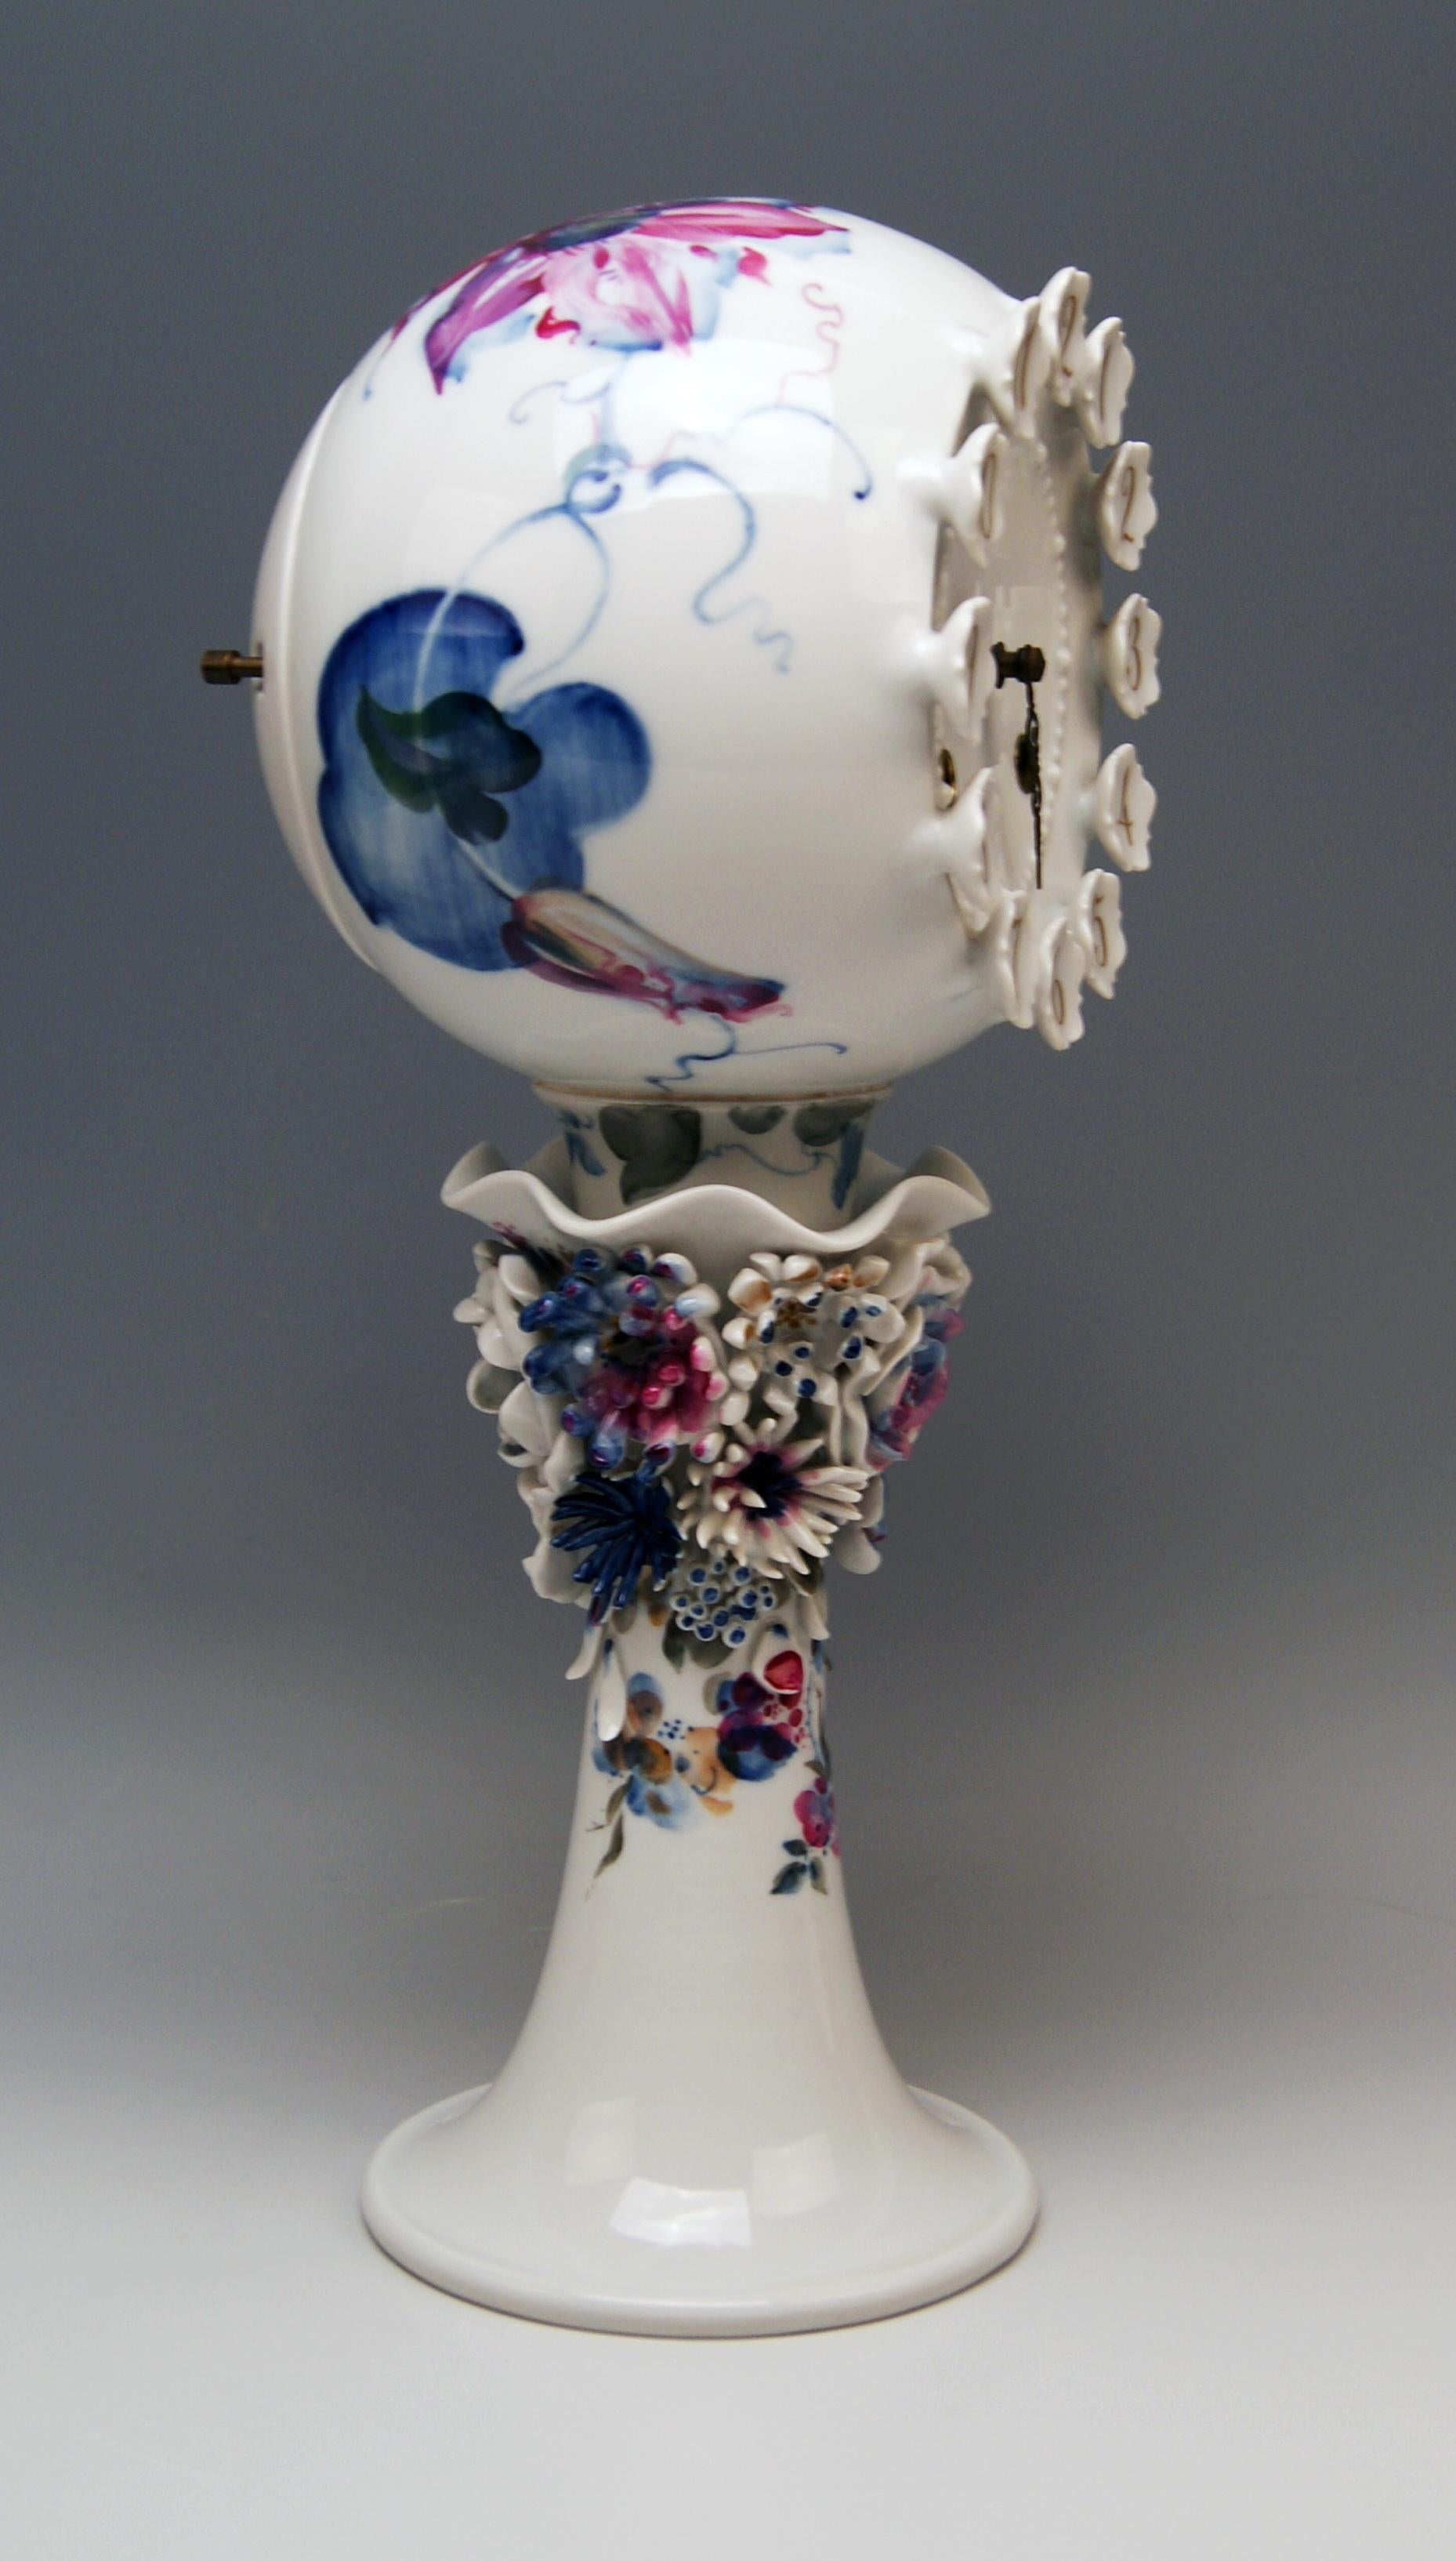 Meissen gorgeous rare table clock of finest manufacturing quality.
Measures: height 38.5 cm (= 15.15 inches)
diameter 17.5 cm (= 6.88 inches)

Manufactory: Meissen
Hallmarked: Blue Meissen Sword Mark (underglazed)
First quality
Model 60886 /